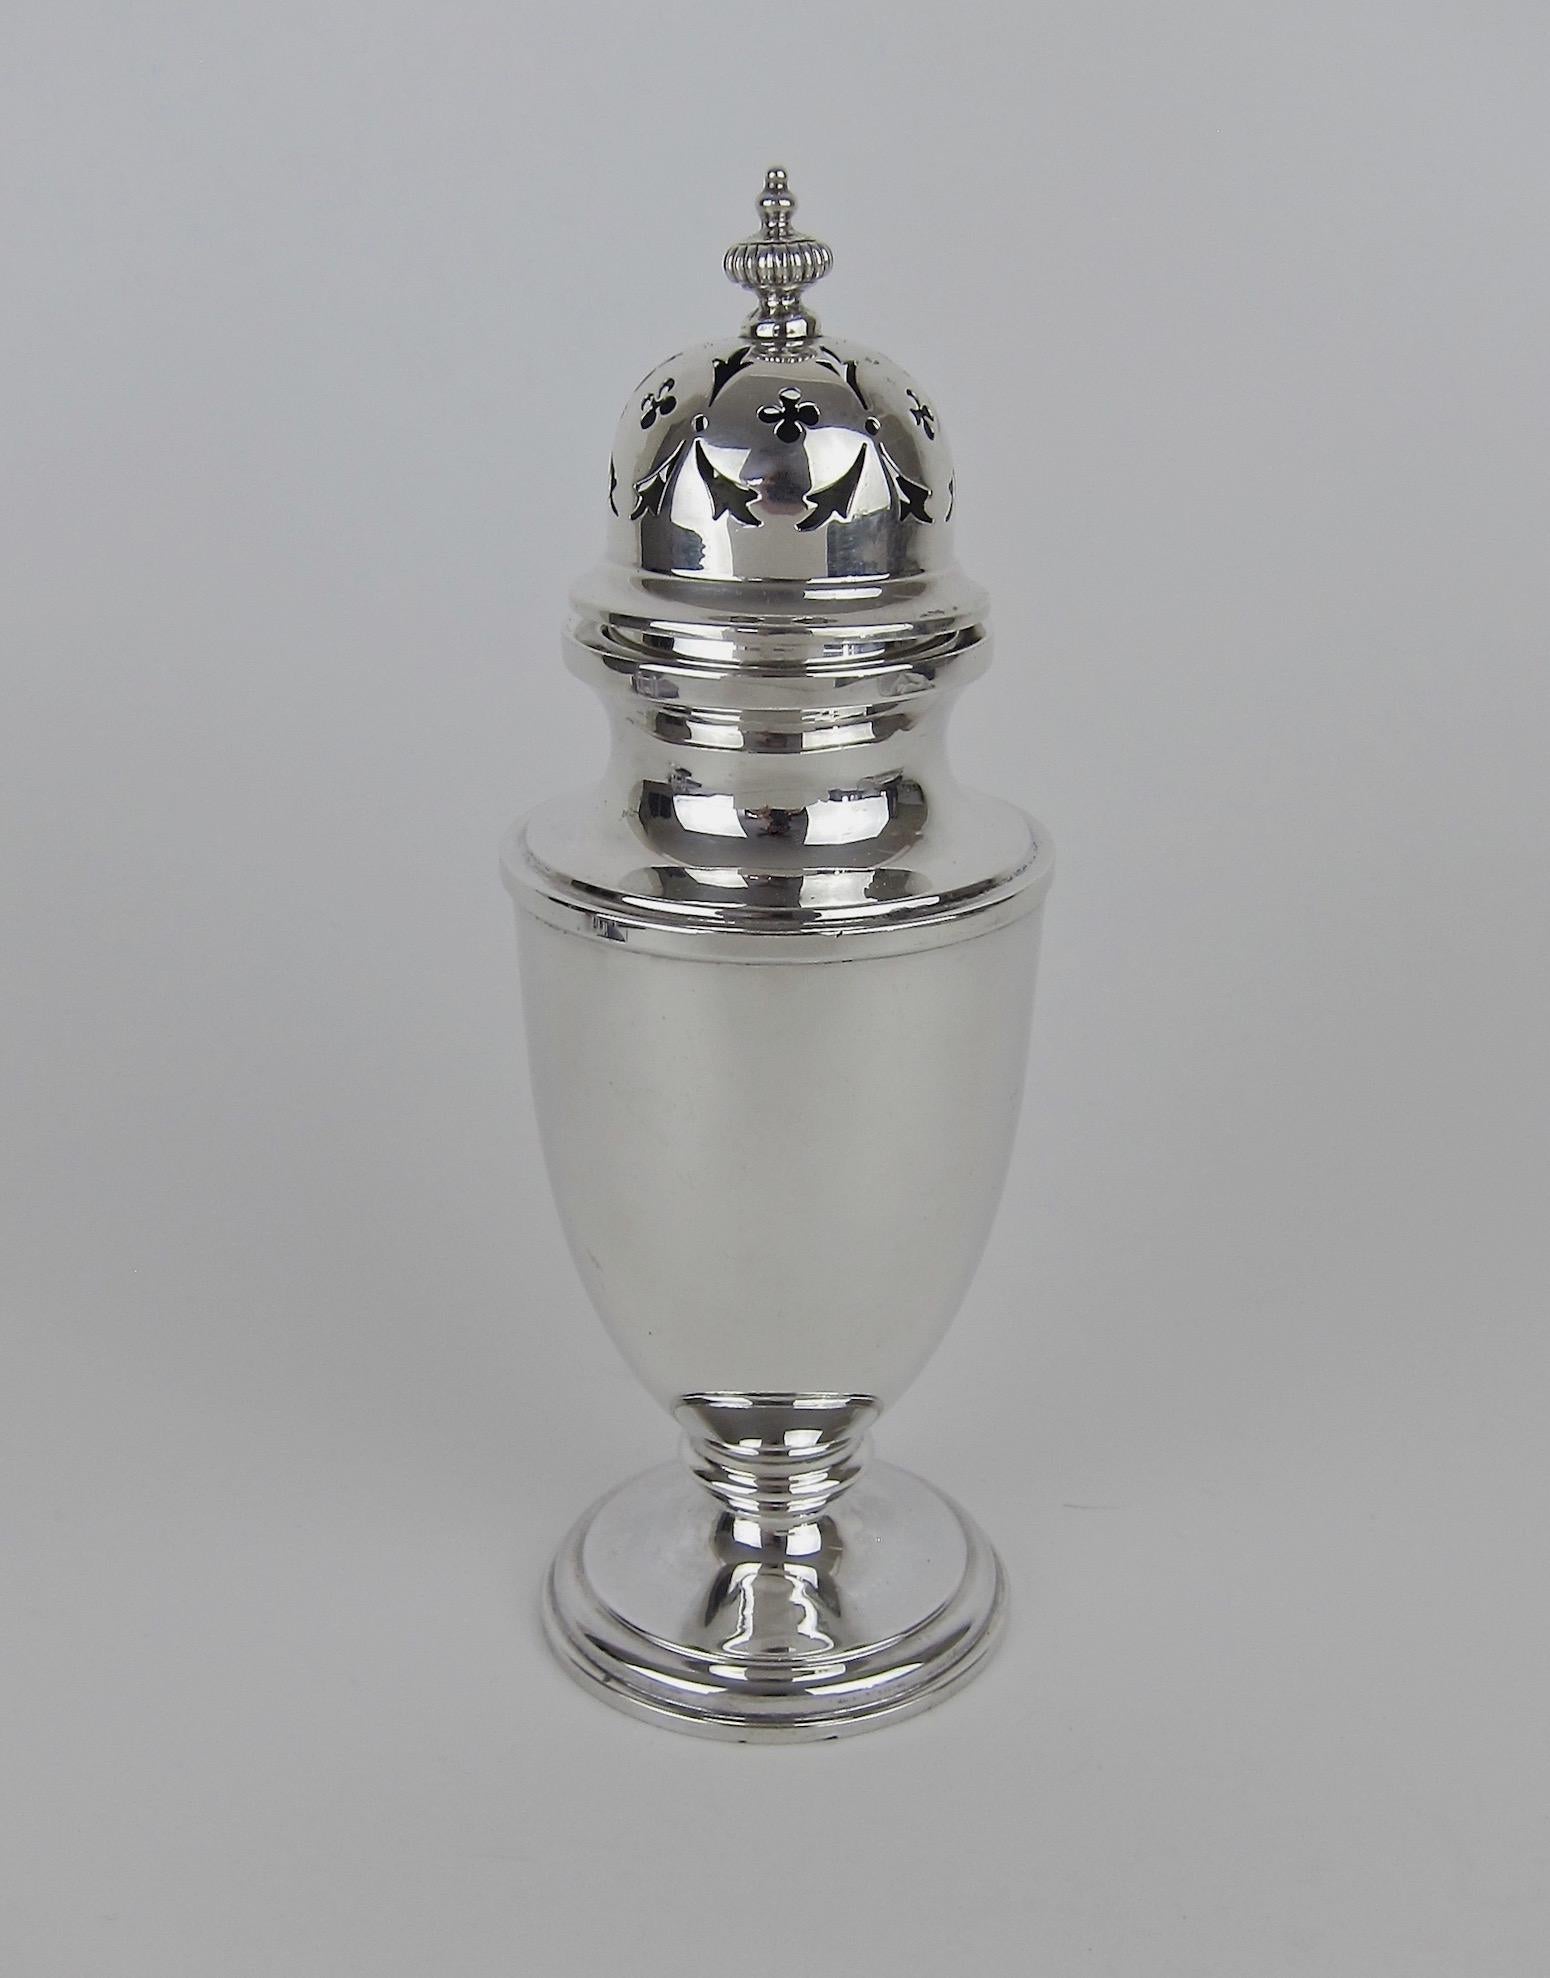 An antique English sugar caster or muffineer made in 1912 by E. S. Barnsley & Co. of Birmingham. The sterling silver sugar shaker has an urn-shaped body on top of a stepped circular foot. The removable dome-shaped cover is pierced with trefid and